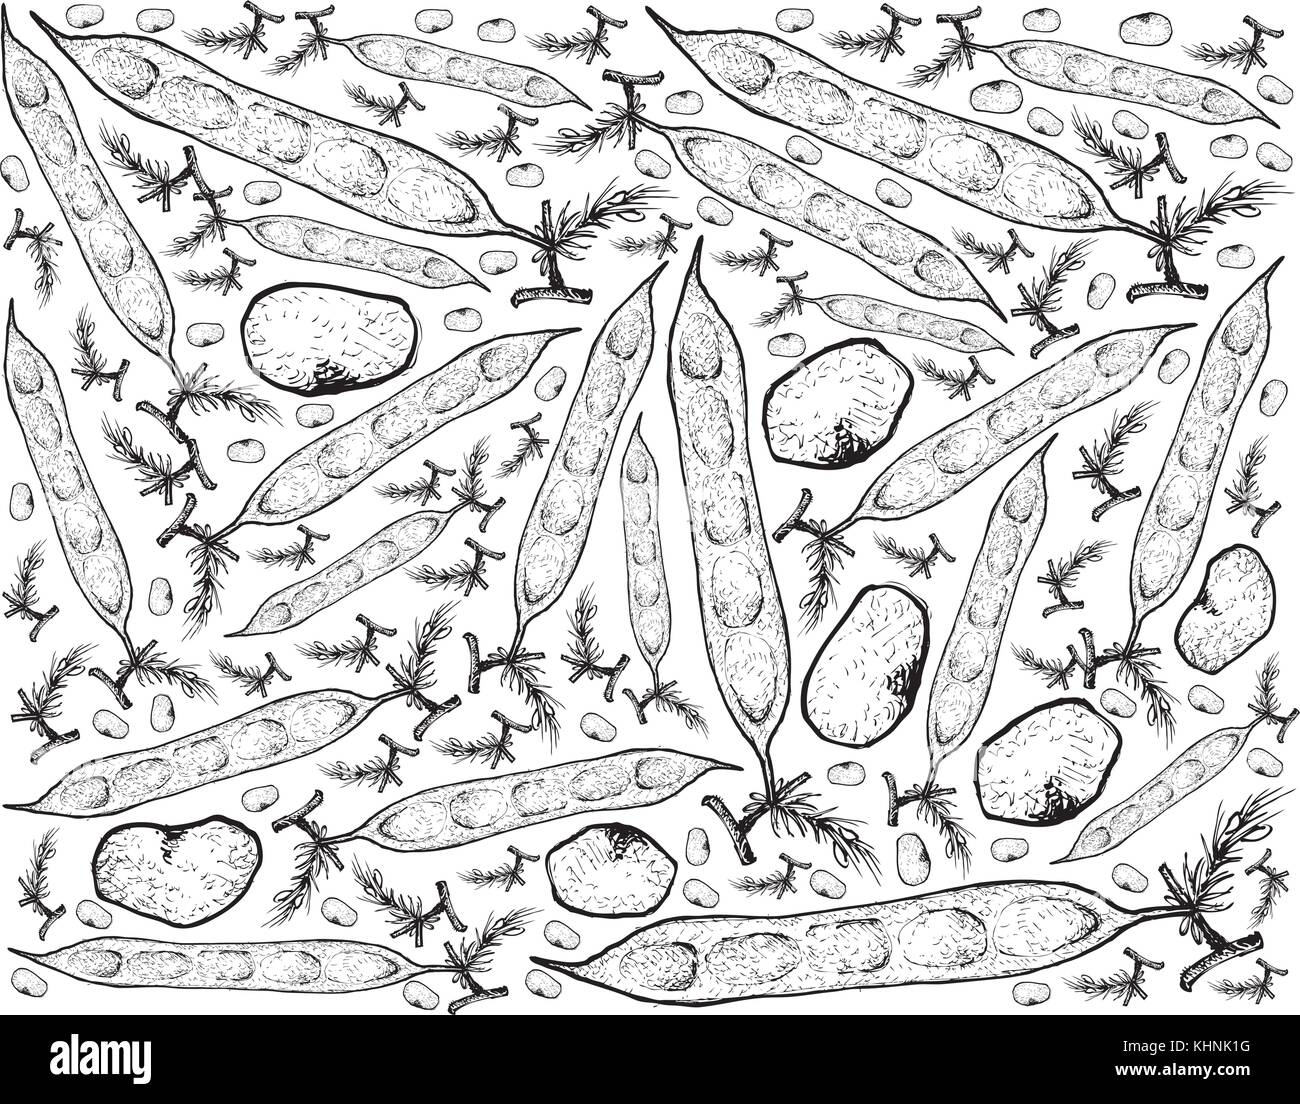 Vegetable, Illustration of Hand Drawn Sketch Fresh Cluster Bean or Guar Isolated on White Background. Stock Vector